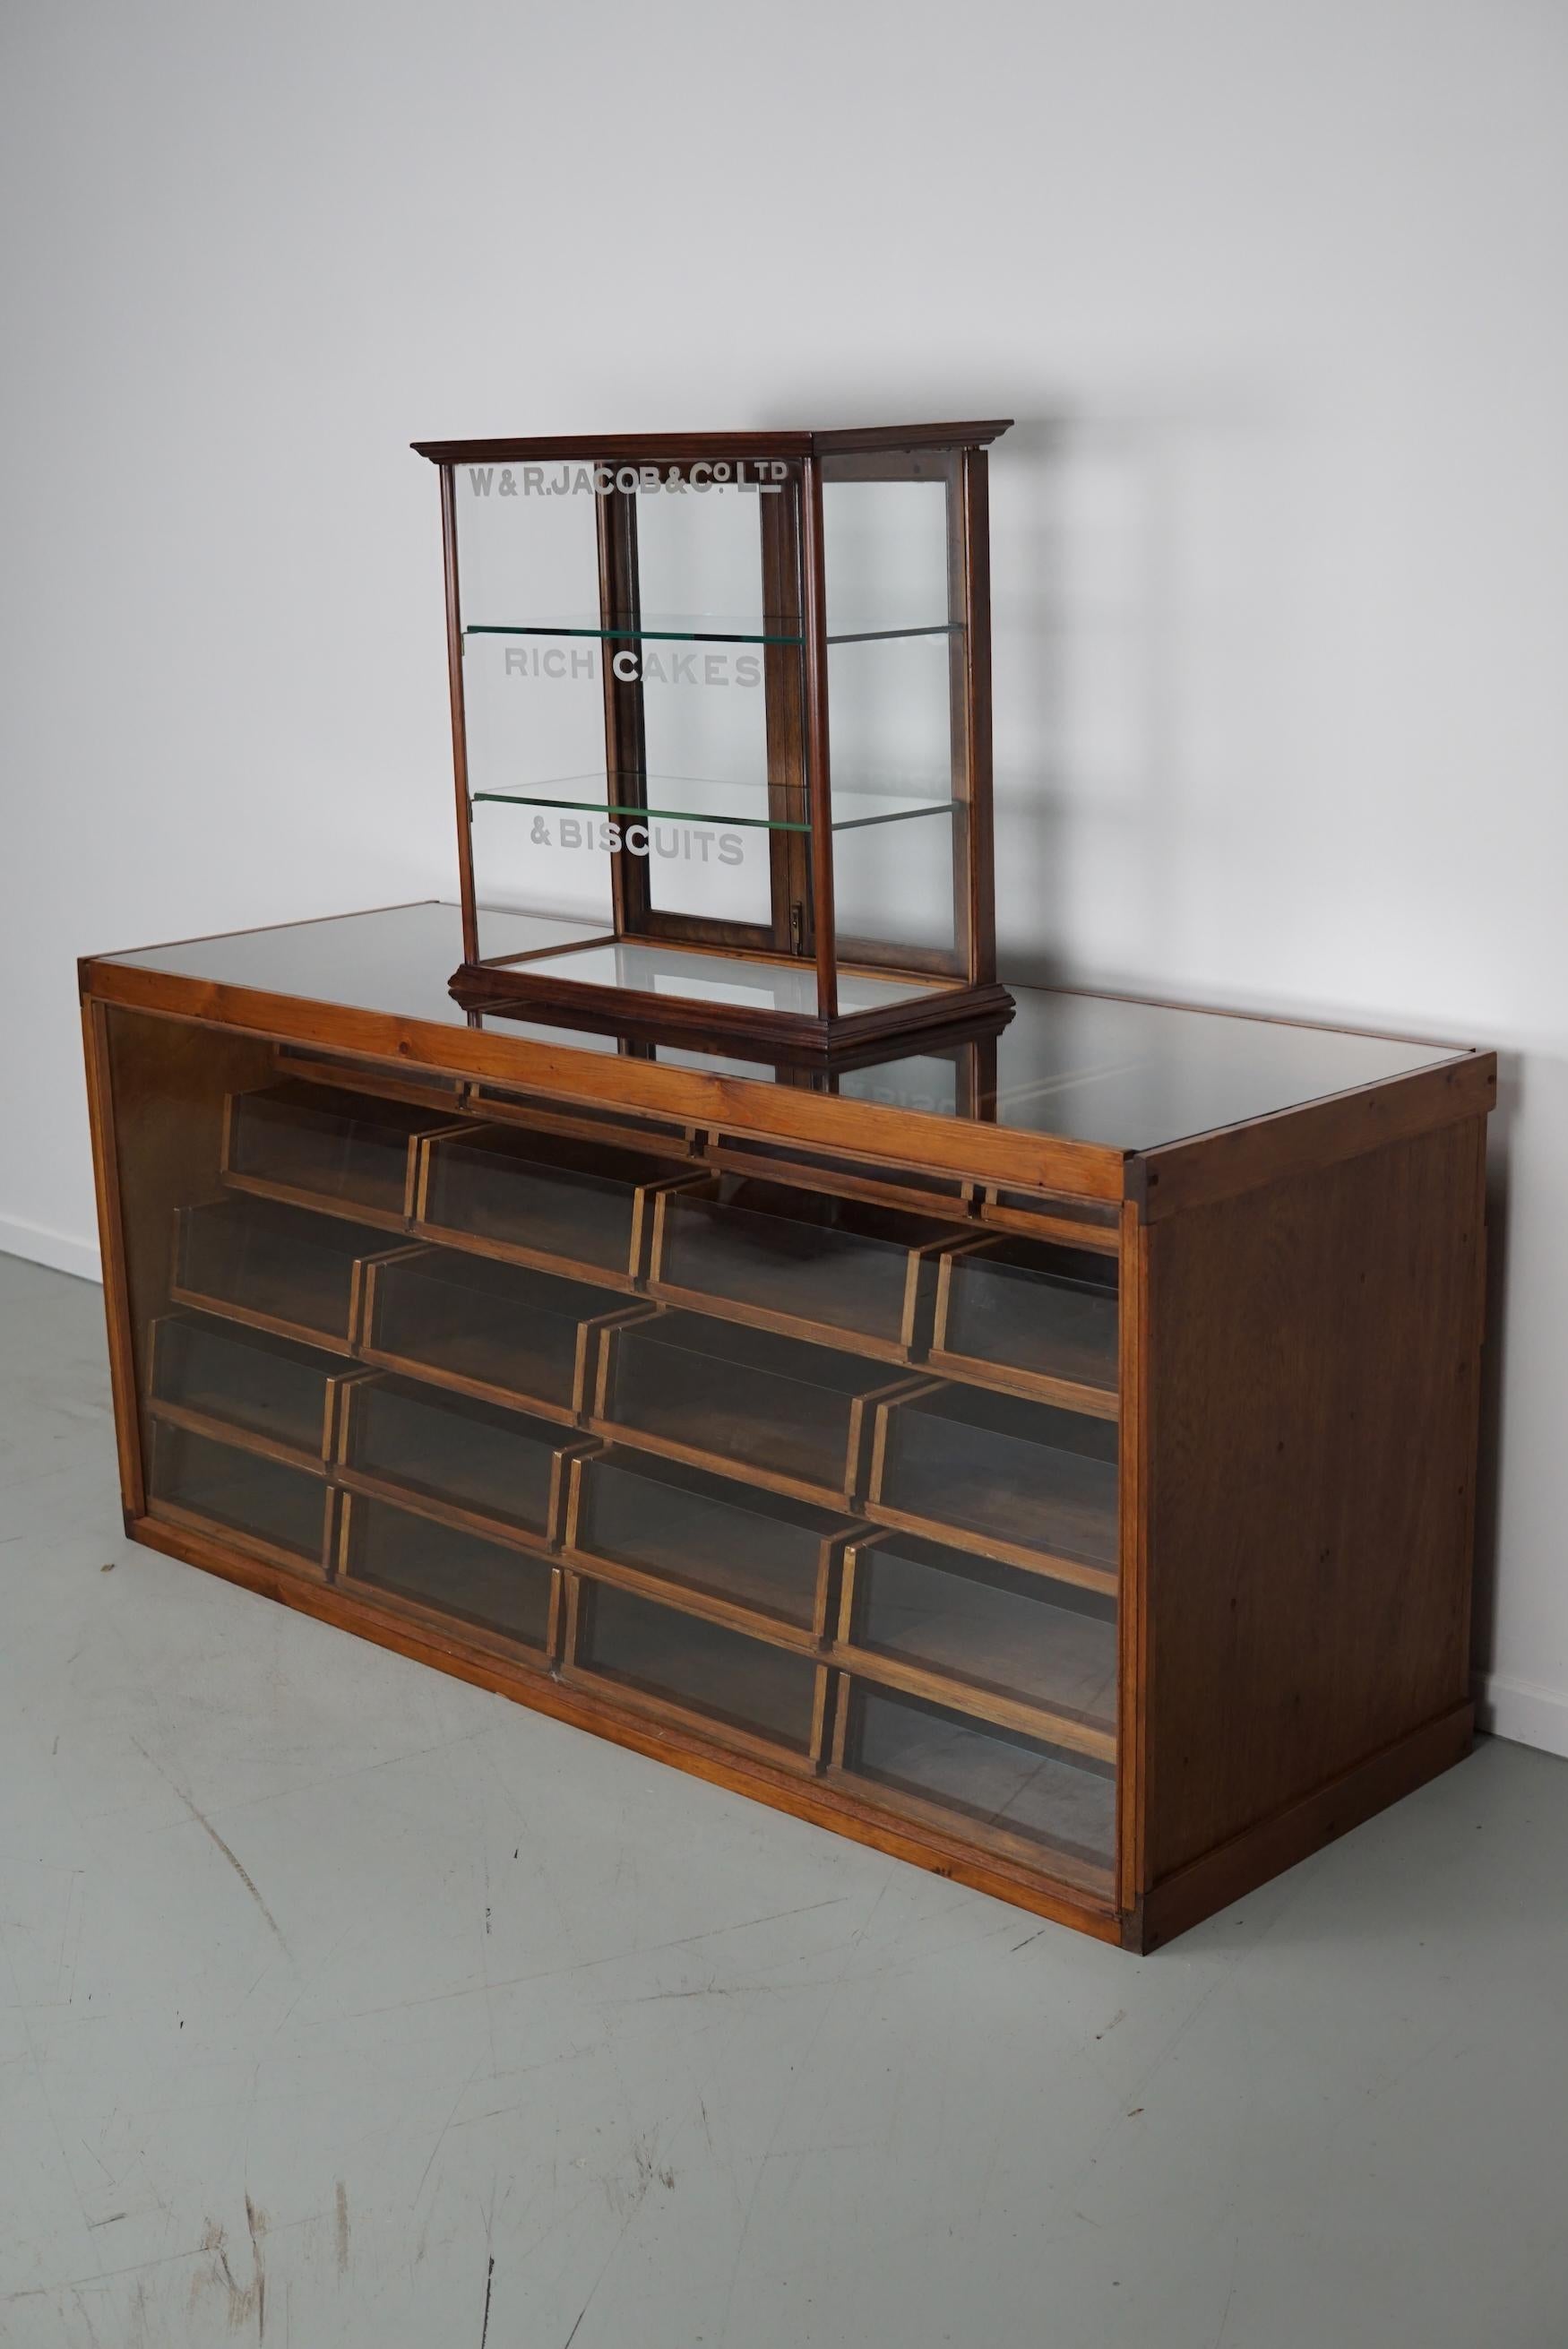 This shop display cabinet was made to display cakes and biscuits. The cabinet has two glass shelves and a white glass bottom. This is a very attractive and useful piece and it is in good antique condition.